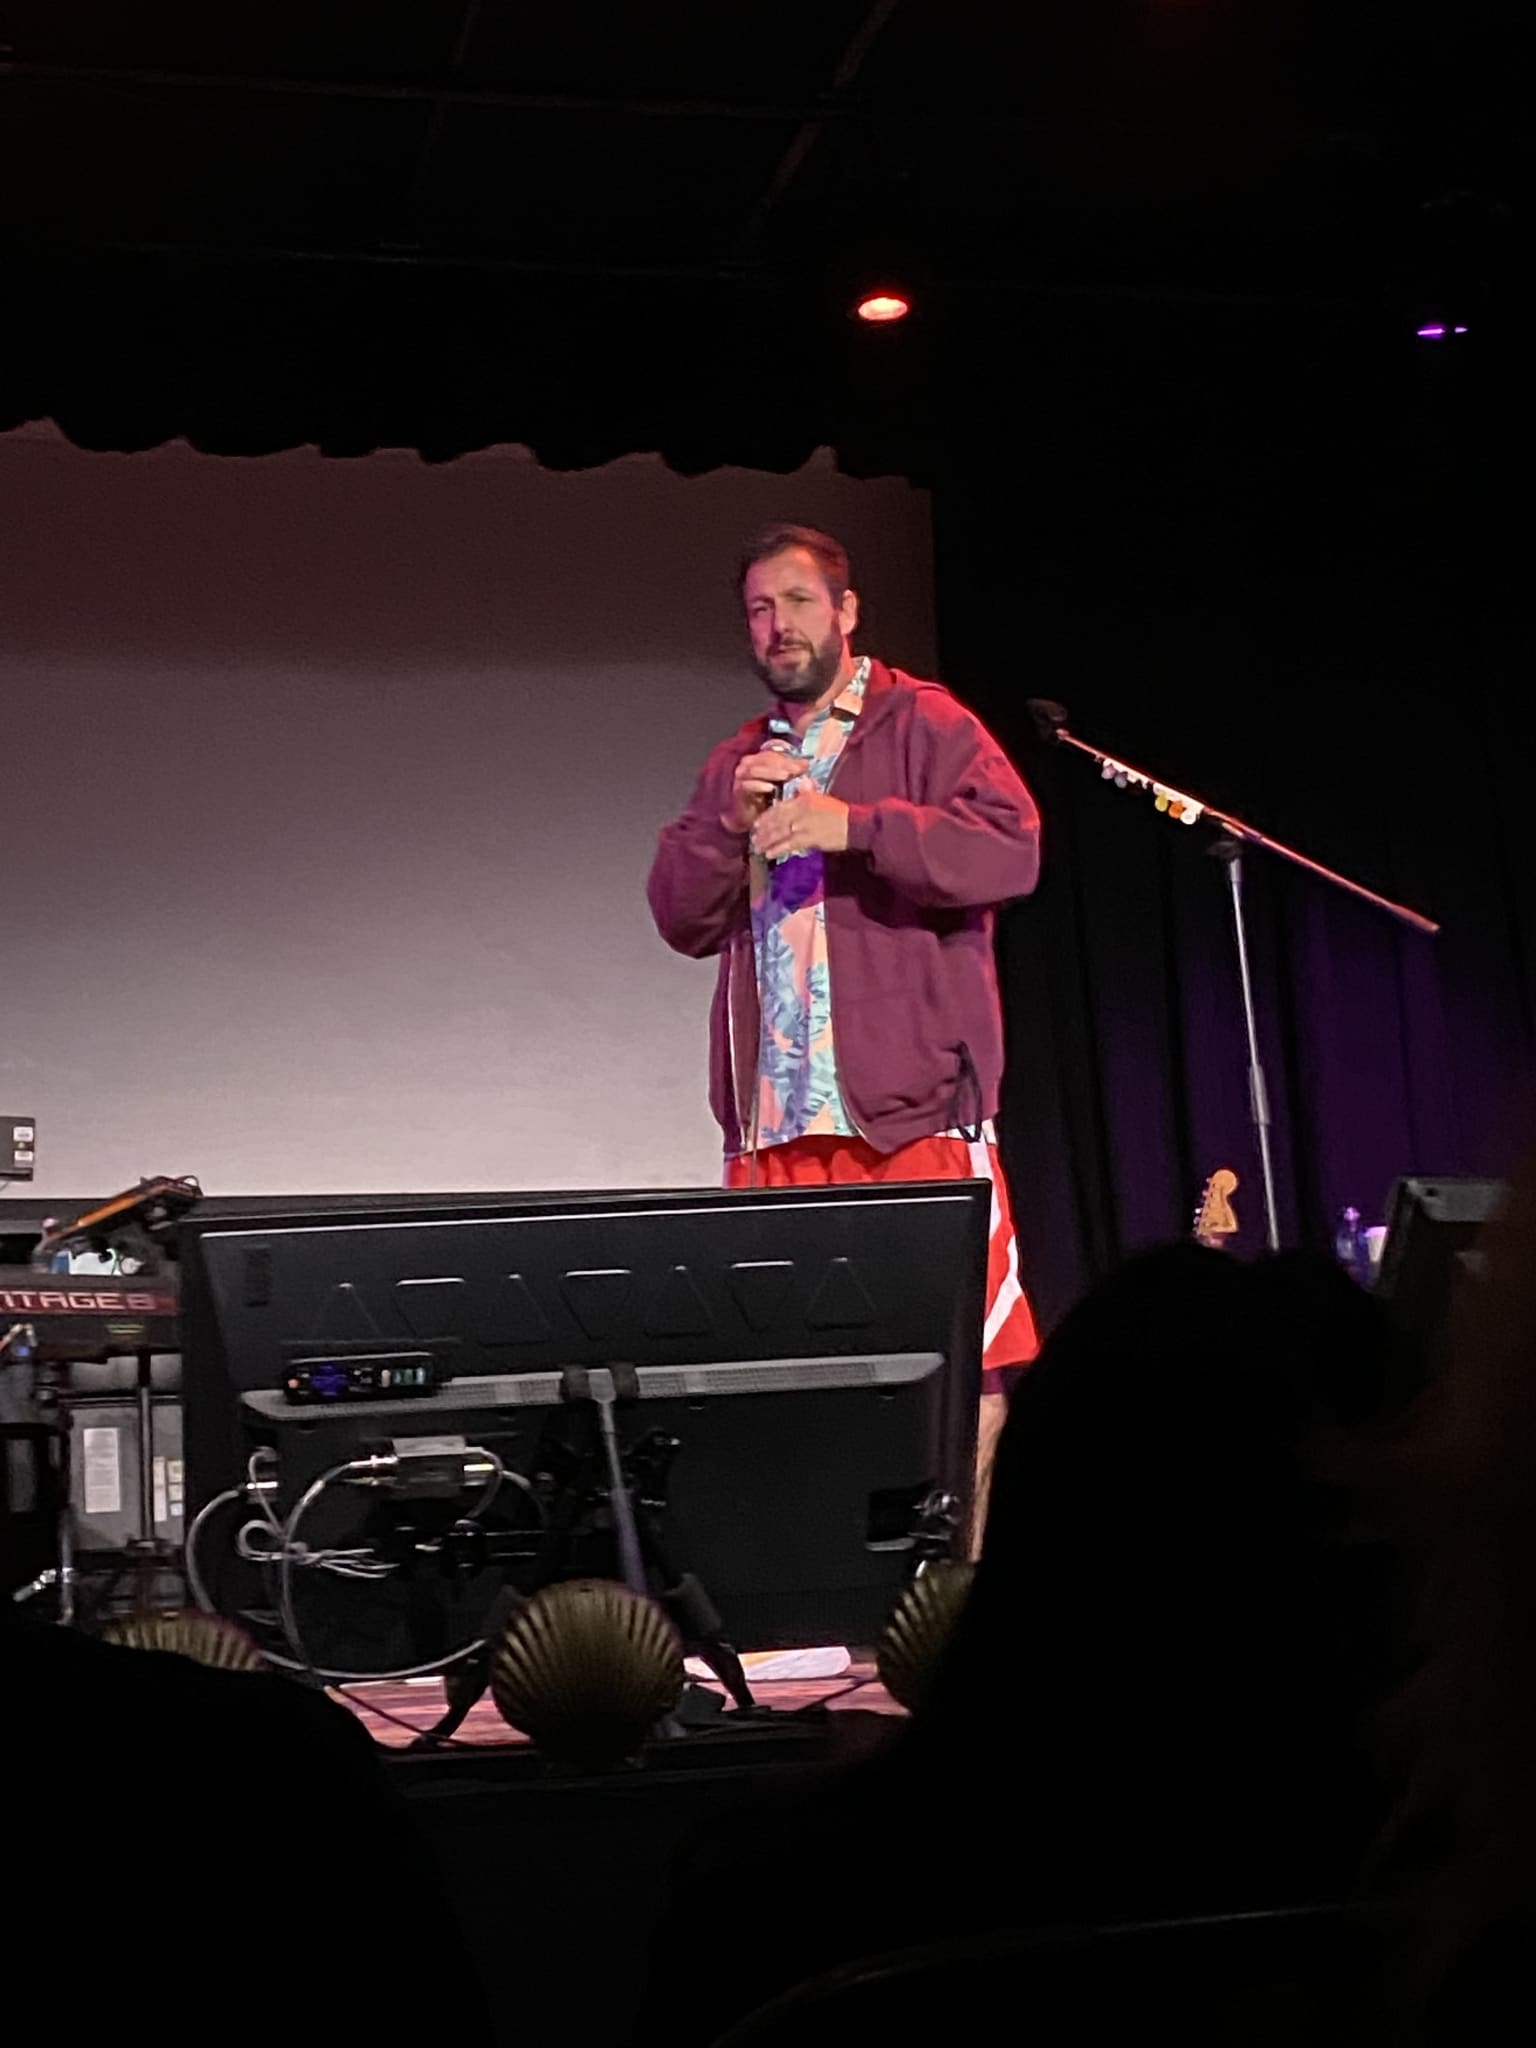 The Adam Sandler Stand Up Experience My Review Of the Sandman Live